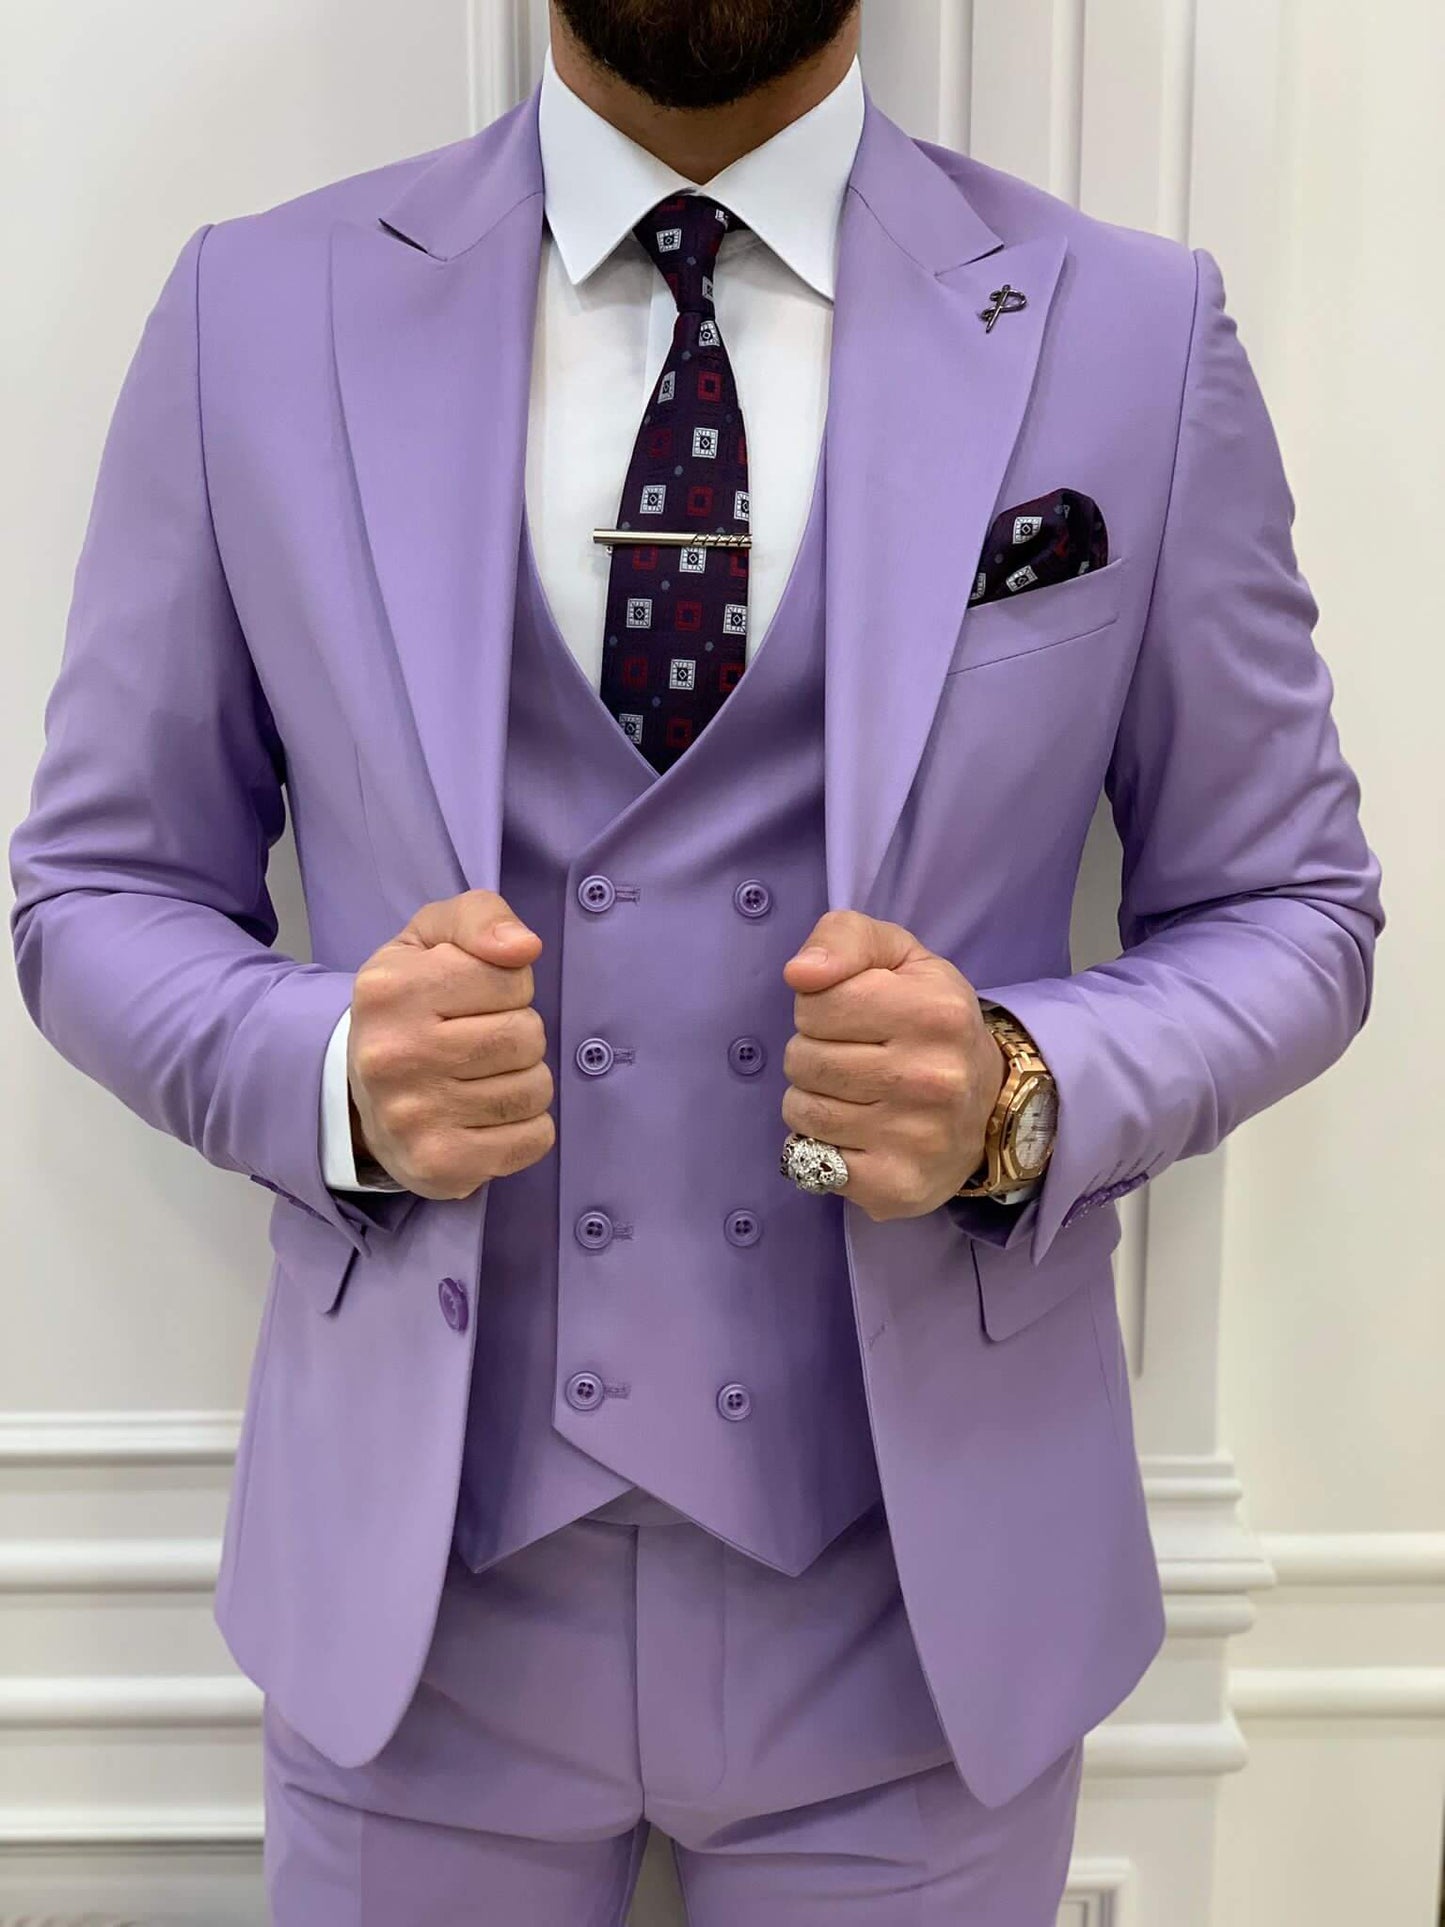 Model confidently showcasing HolloMen's Purple Slim Fit Suit, accentuating its sleek design and vibrant color.